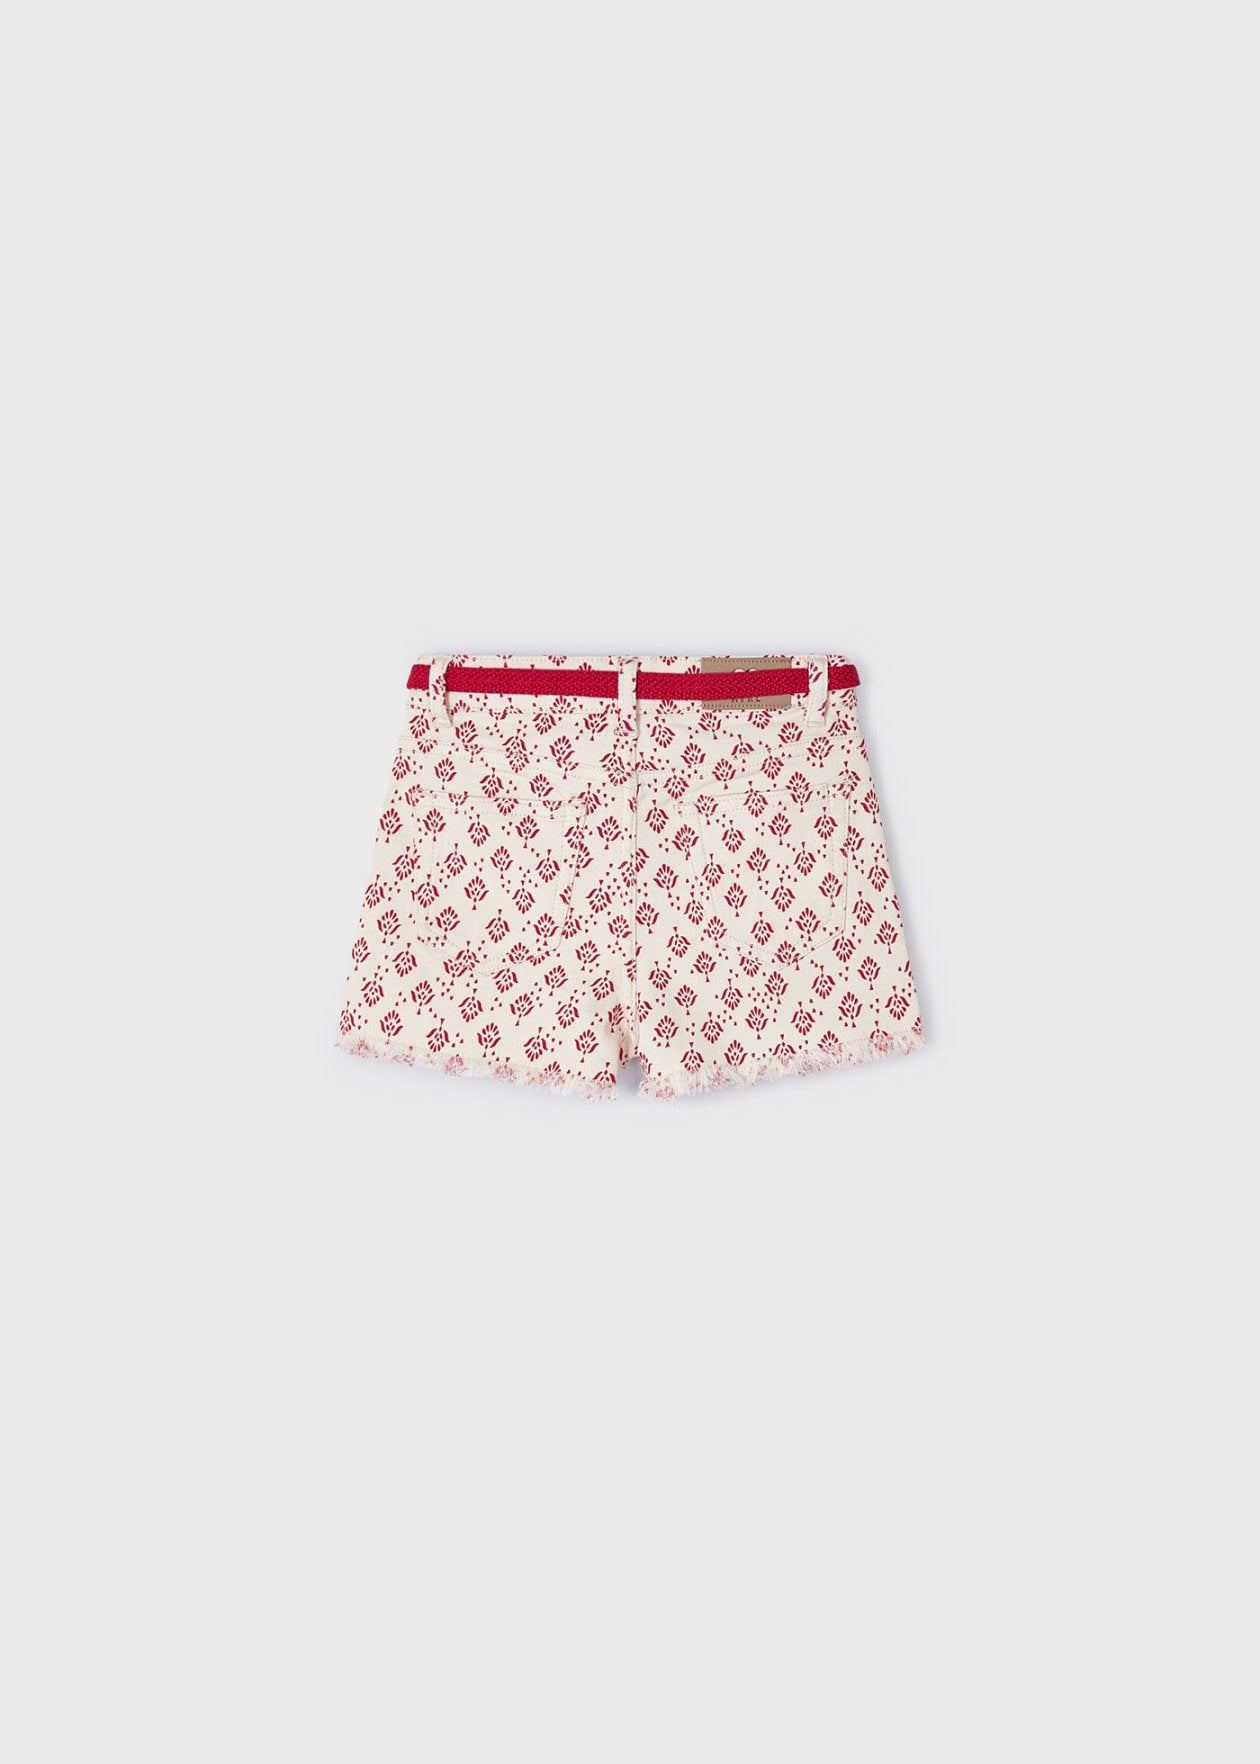 Chickpea Shorts